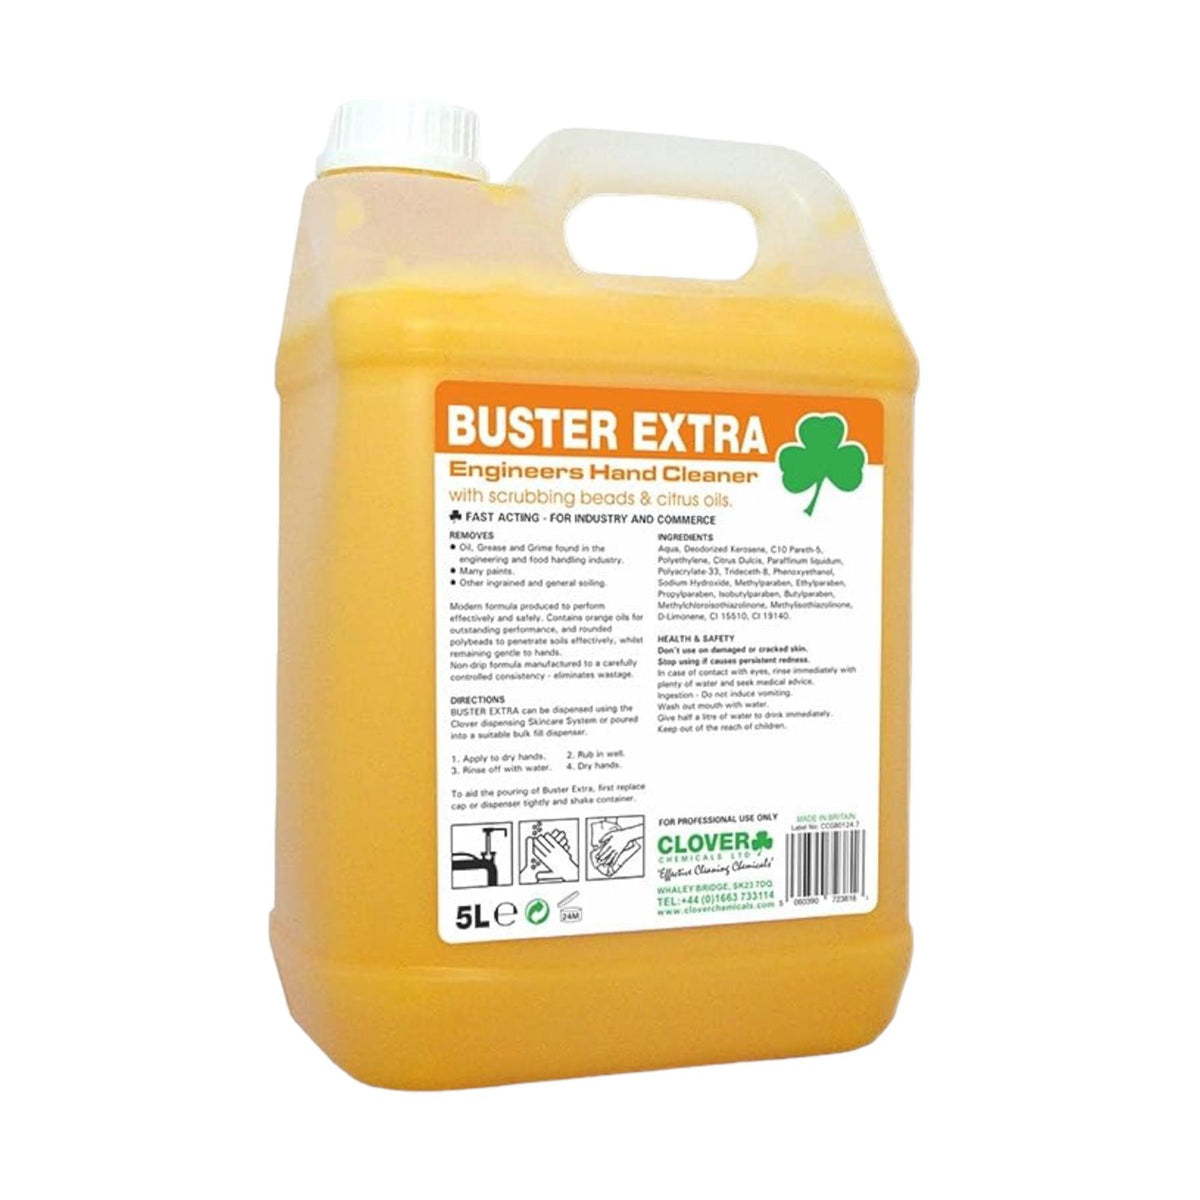 Clover Buster Extra Engineers Hand Cleaner 5 Litre